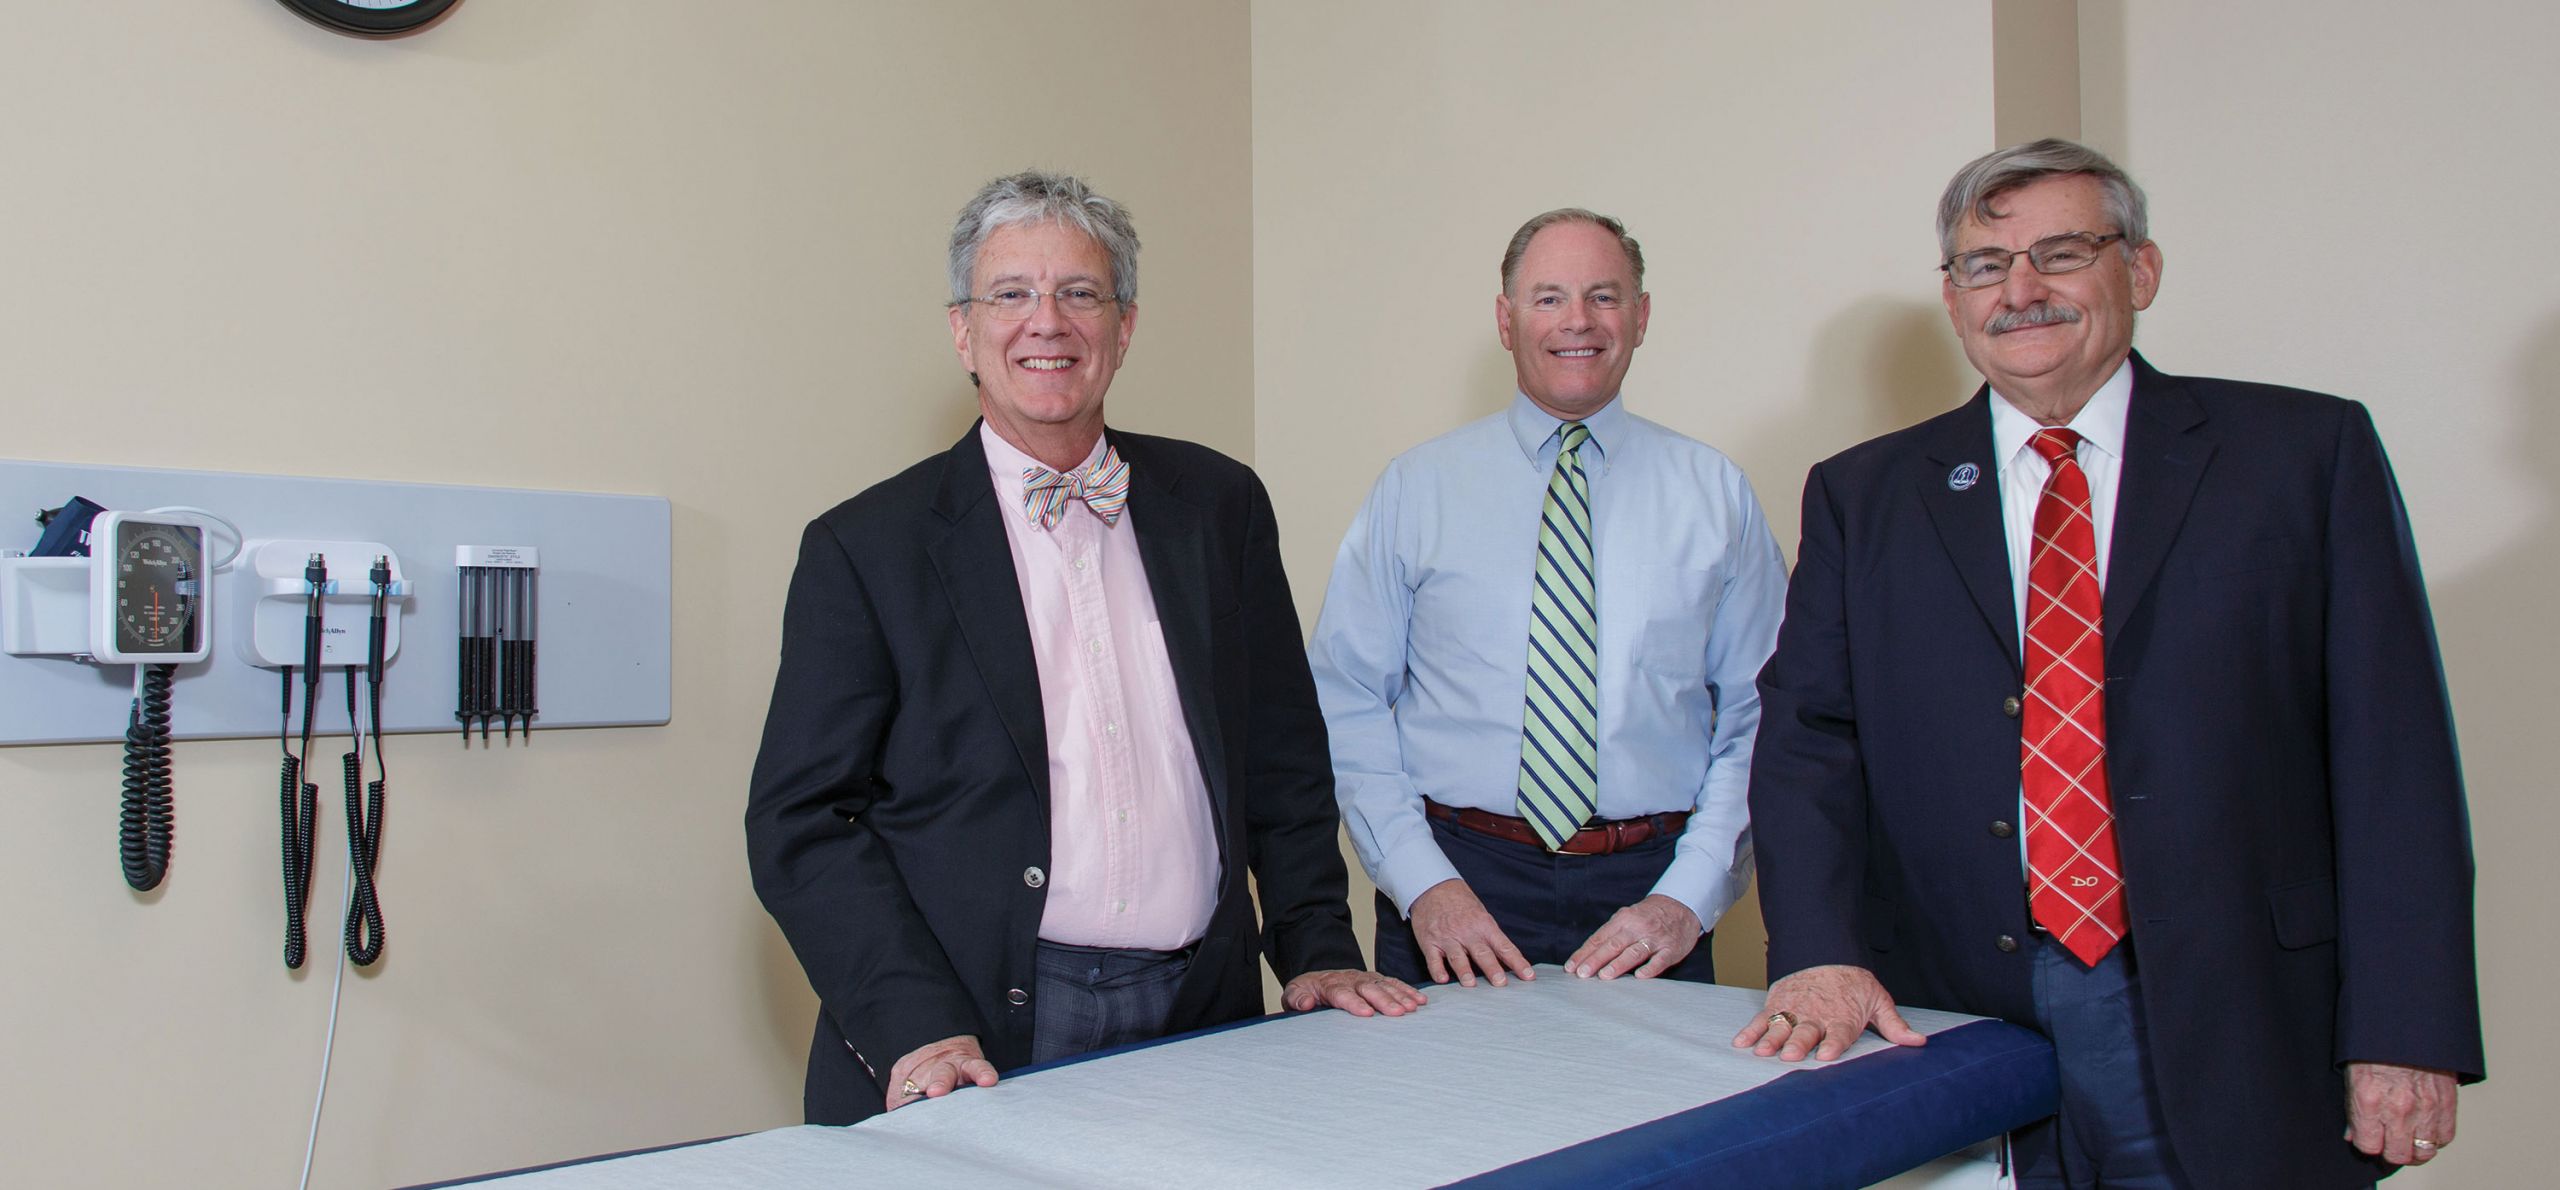 From left, Dr. Thomas Eppes, president of Central Virginia Family Physicians; Dr. Keith Metzler, lead physician at the Liberty Mountain Medical Group (LMMG); and Dr. Ronnie Martin, dean of Liberty University College of Osteopathic Medicine, stand in one of LMMG’s exam rooms.